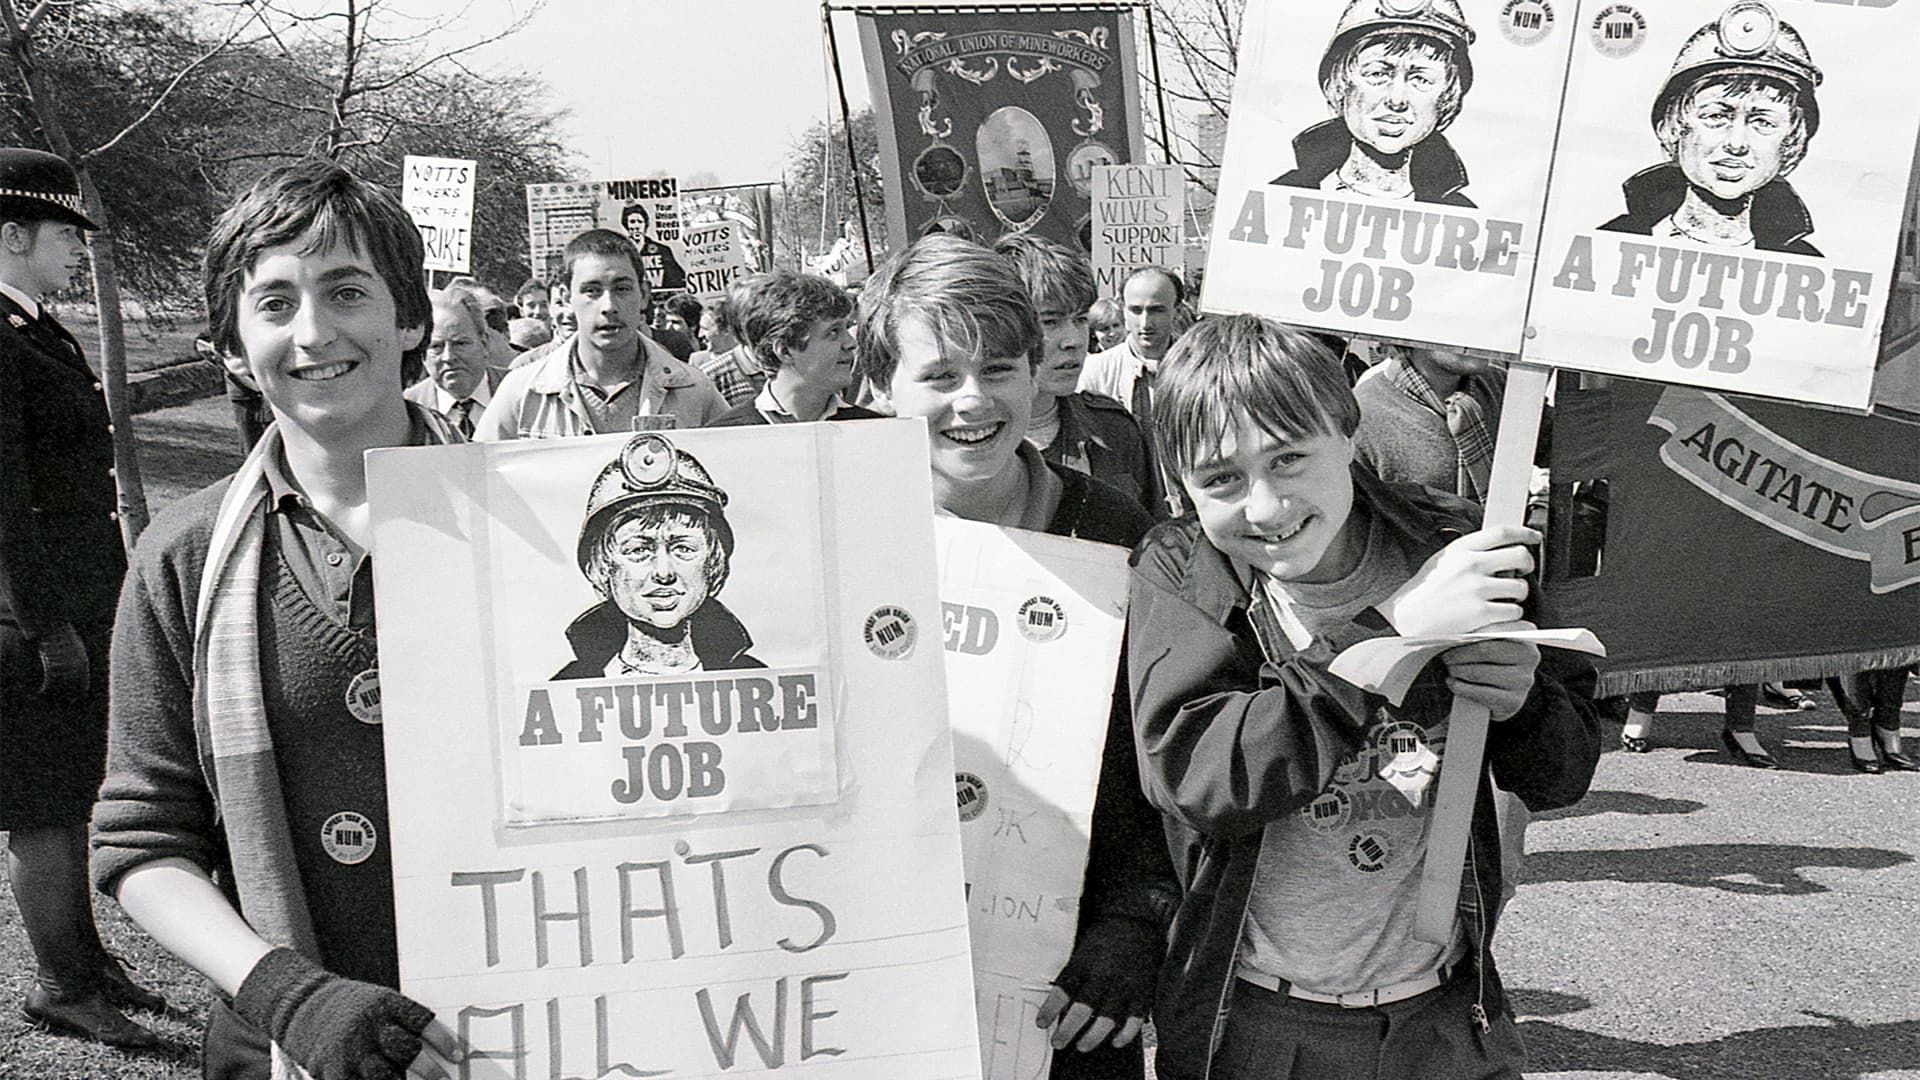 Miners' Strike 1984: The Battle for Britain background